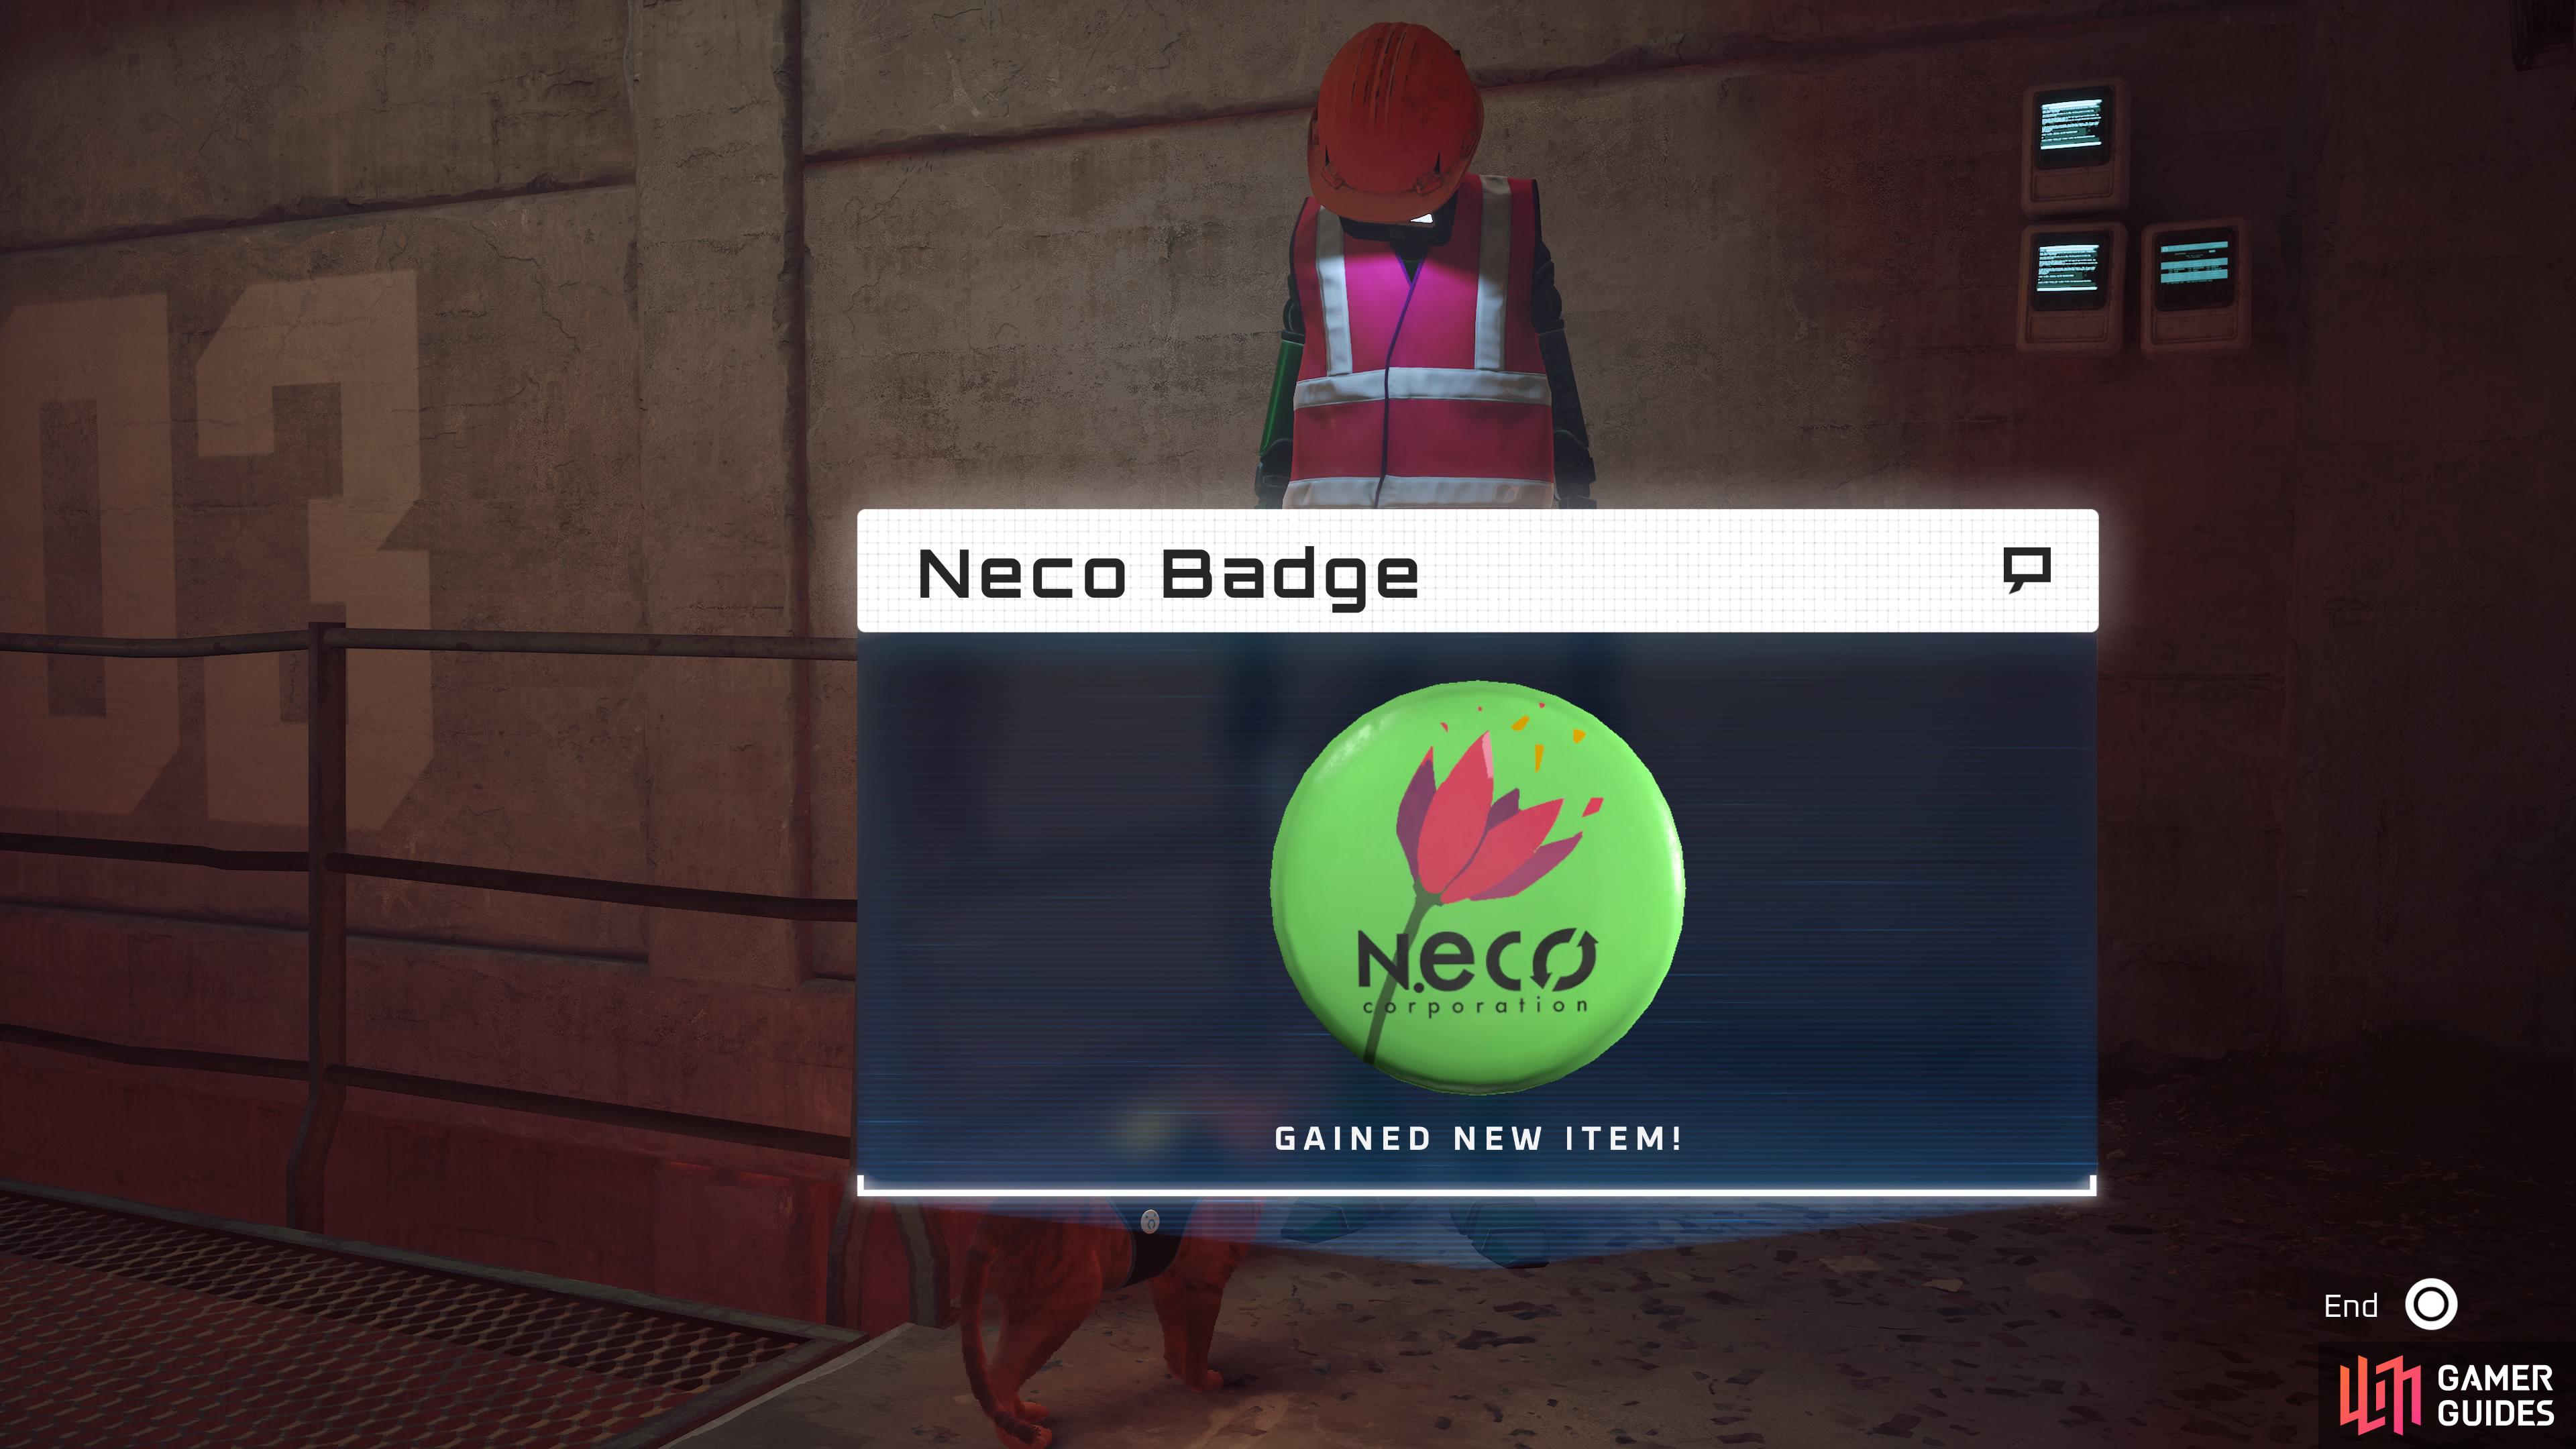 and return it to the Worker for the Neco Badge.